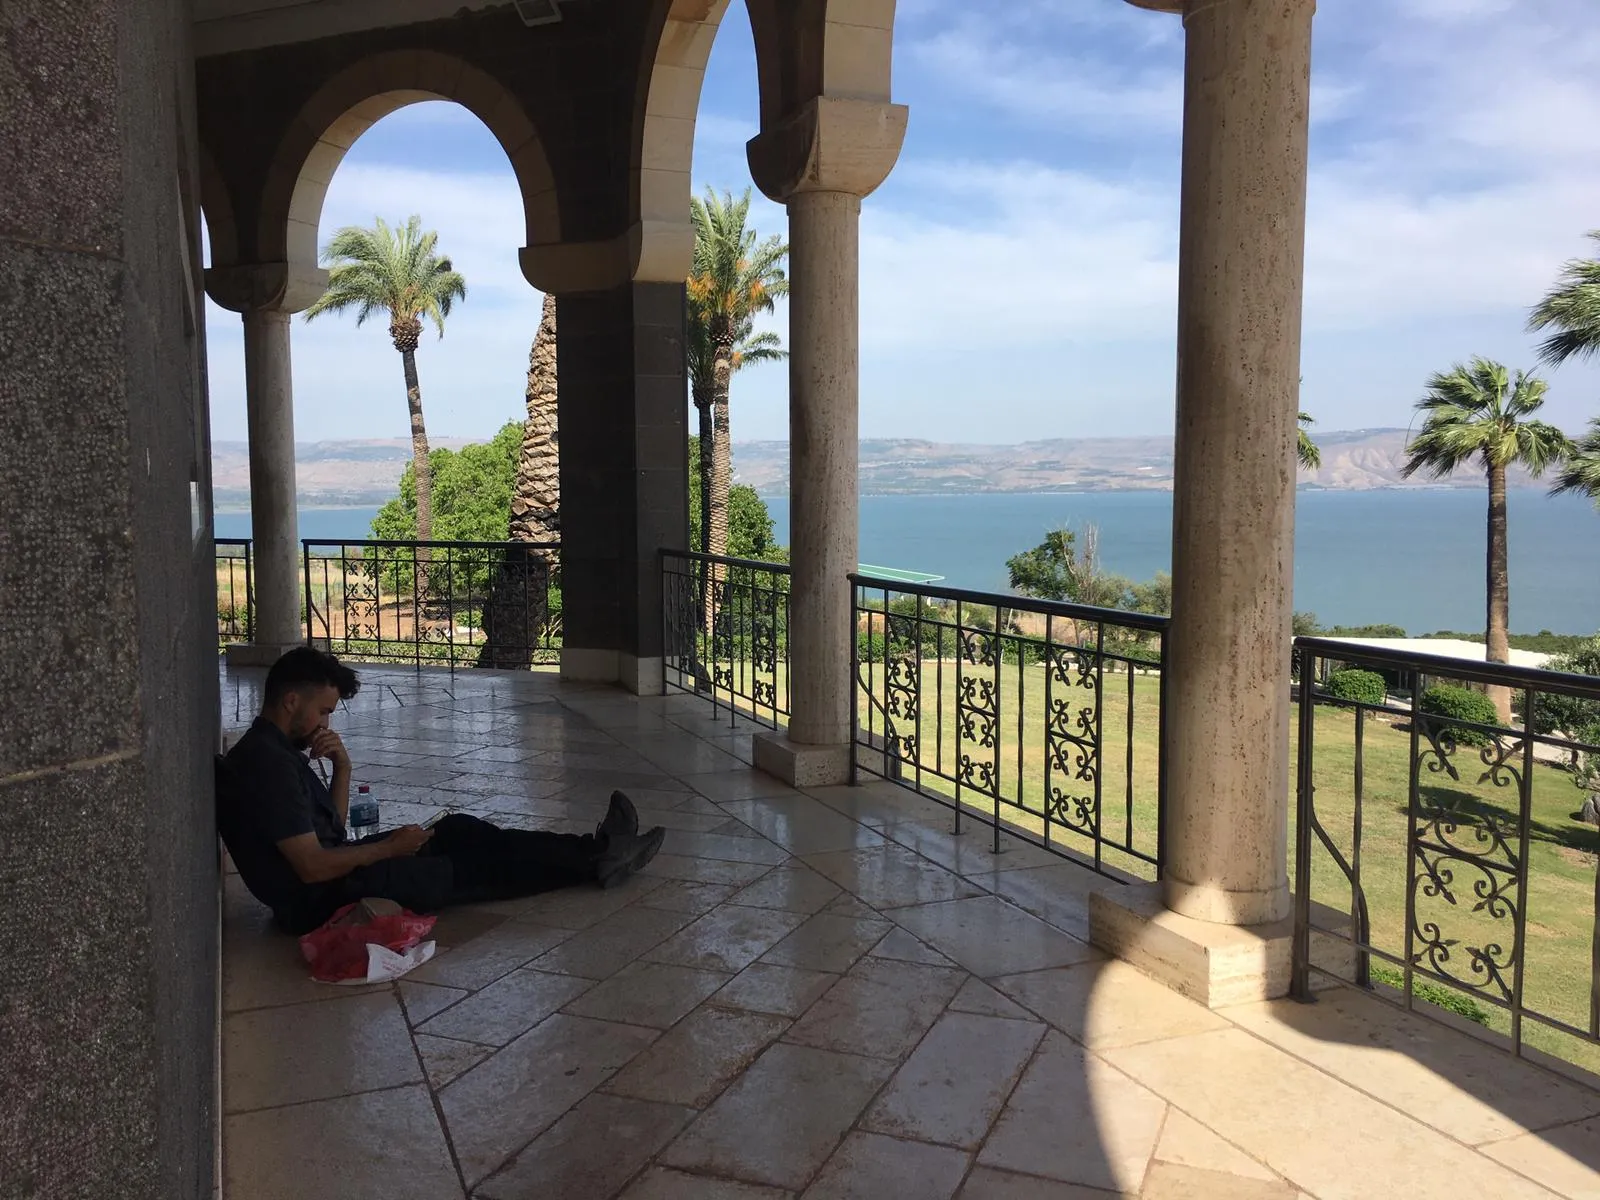 The French pilgrims rest under the portico of the Church of the Beatitudes on a hill overlooking the Sea of Galilee. In the photo is Louis Antona. A journey like this isn't for everyone, but, the three young people said, “if God calls you, go in peace. If God helps you, everything becomes possible.” Credit: Photo courtesy of French pilgrims Madeleine and Marie-Liesse